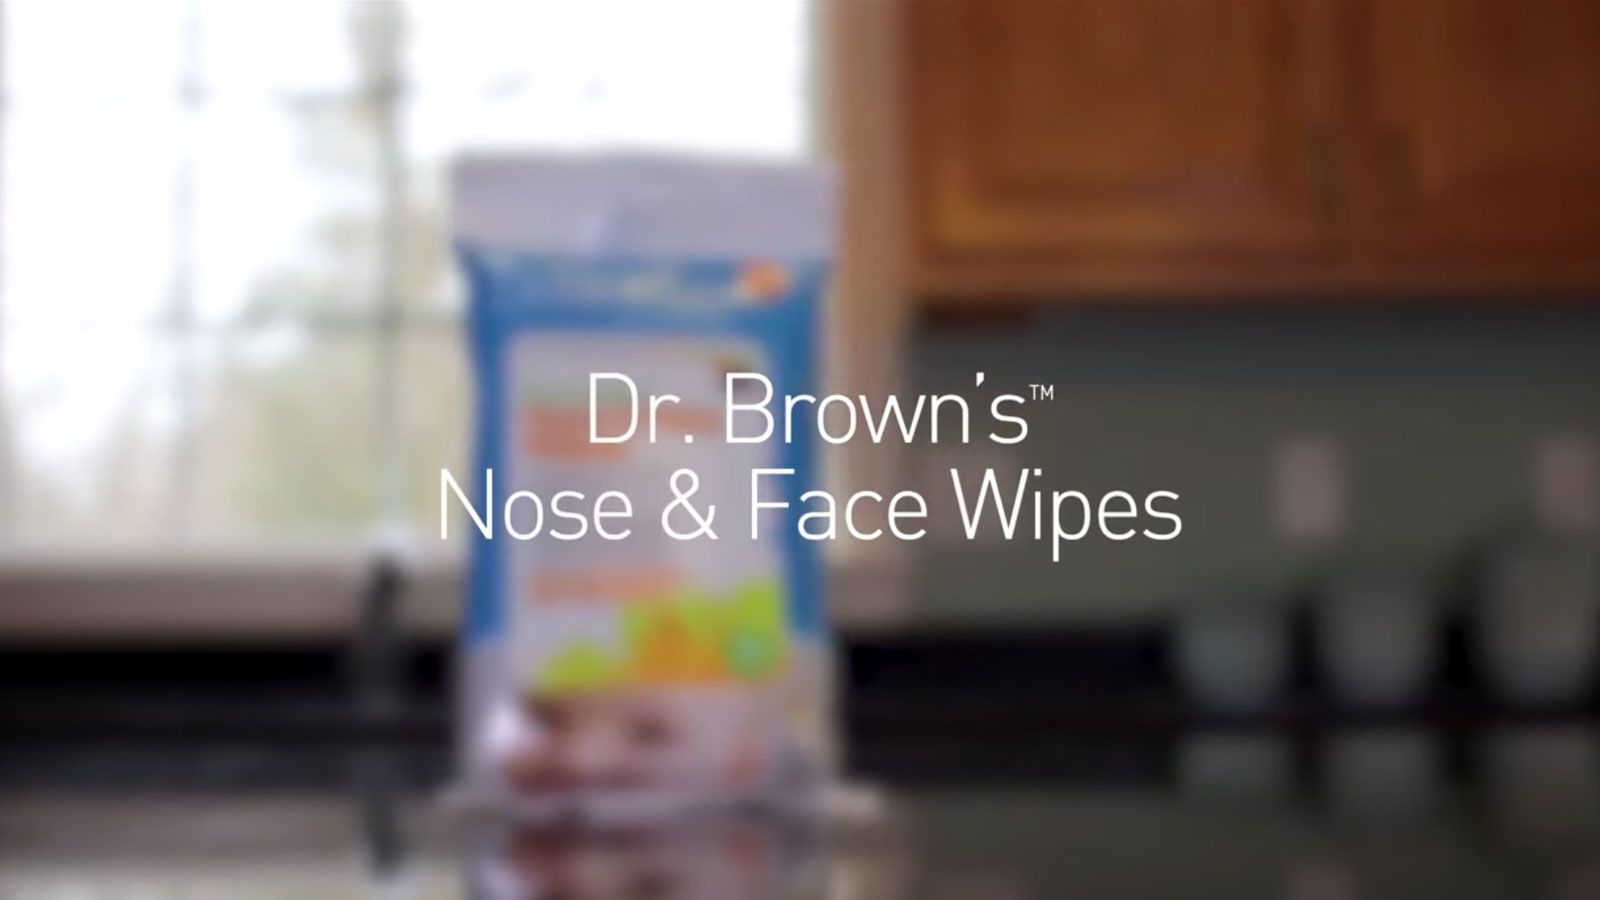 Dr. Brown's Dr. Brown’s™ Nose & Face Wipes